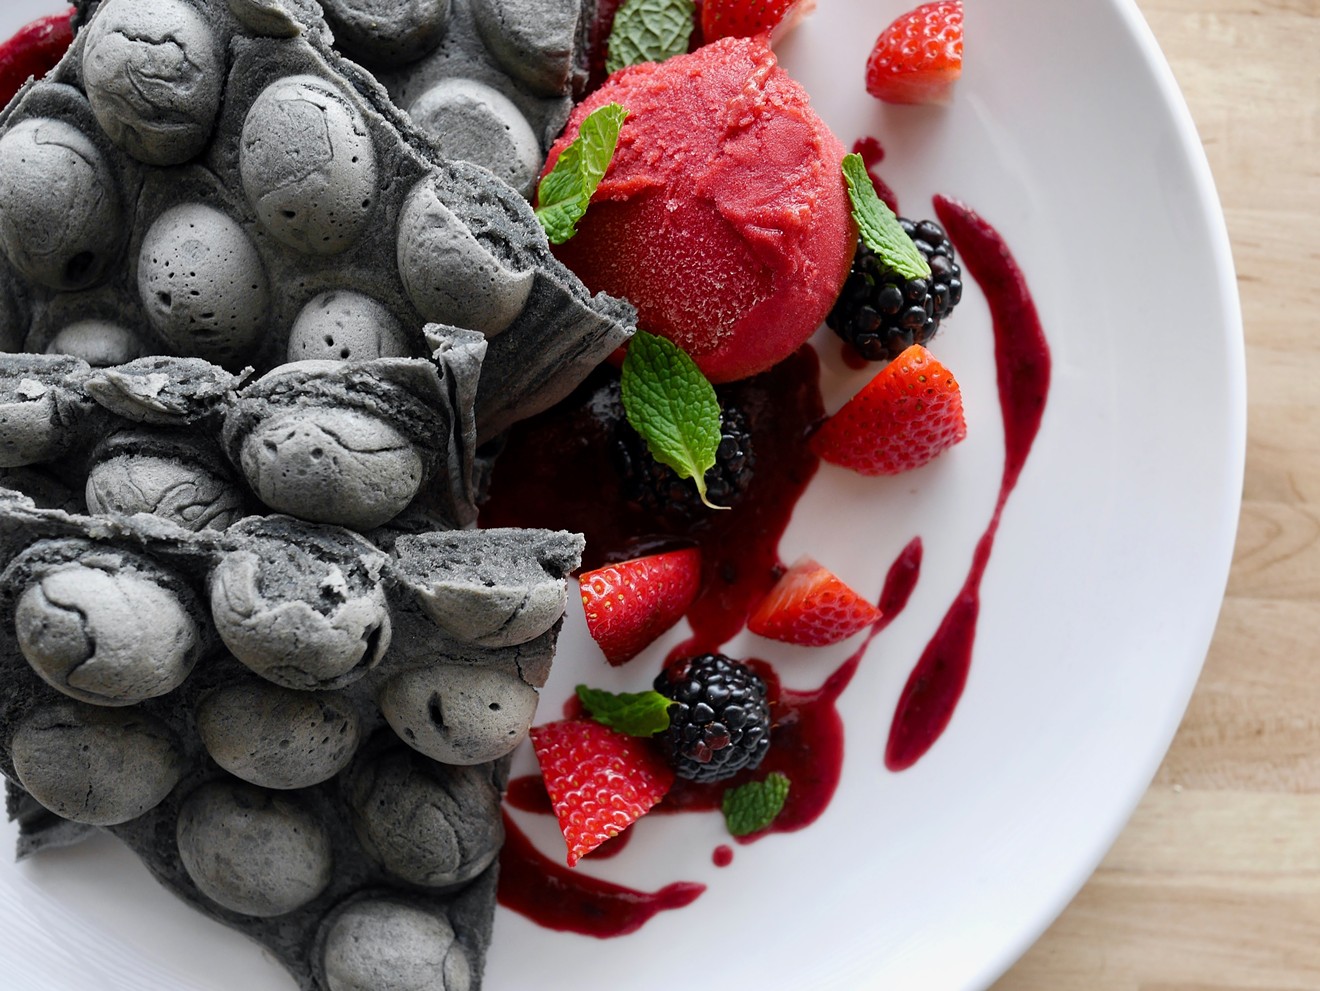 "Goth waffles" made with activated charcoal and topped with fresh fruit.